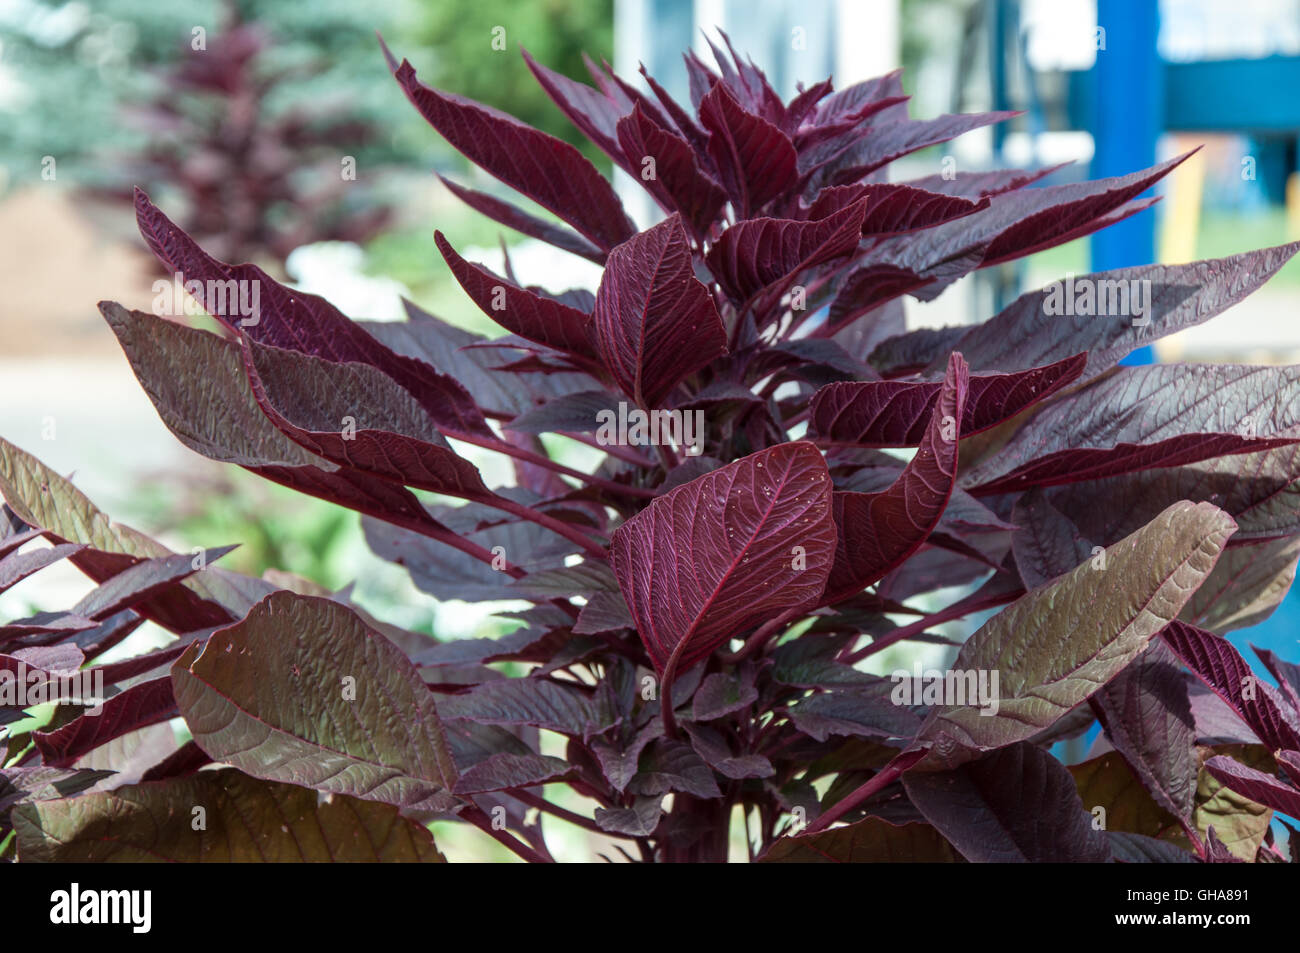 Amaranth has anticancer properties plant, it is called a miracle plant ...